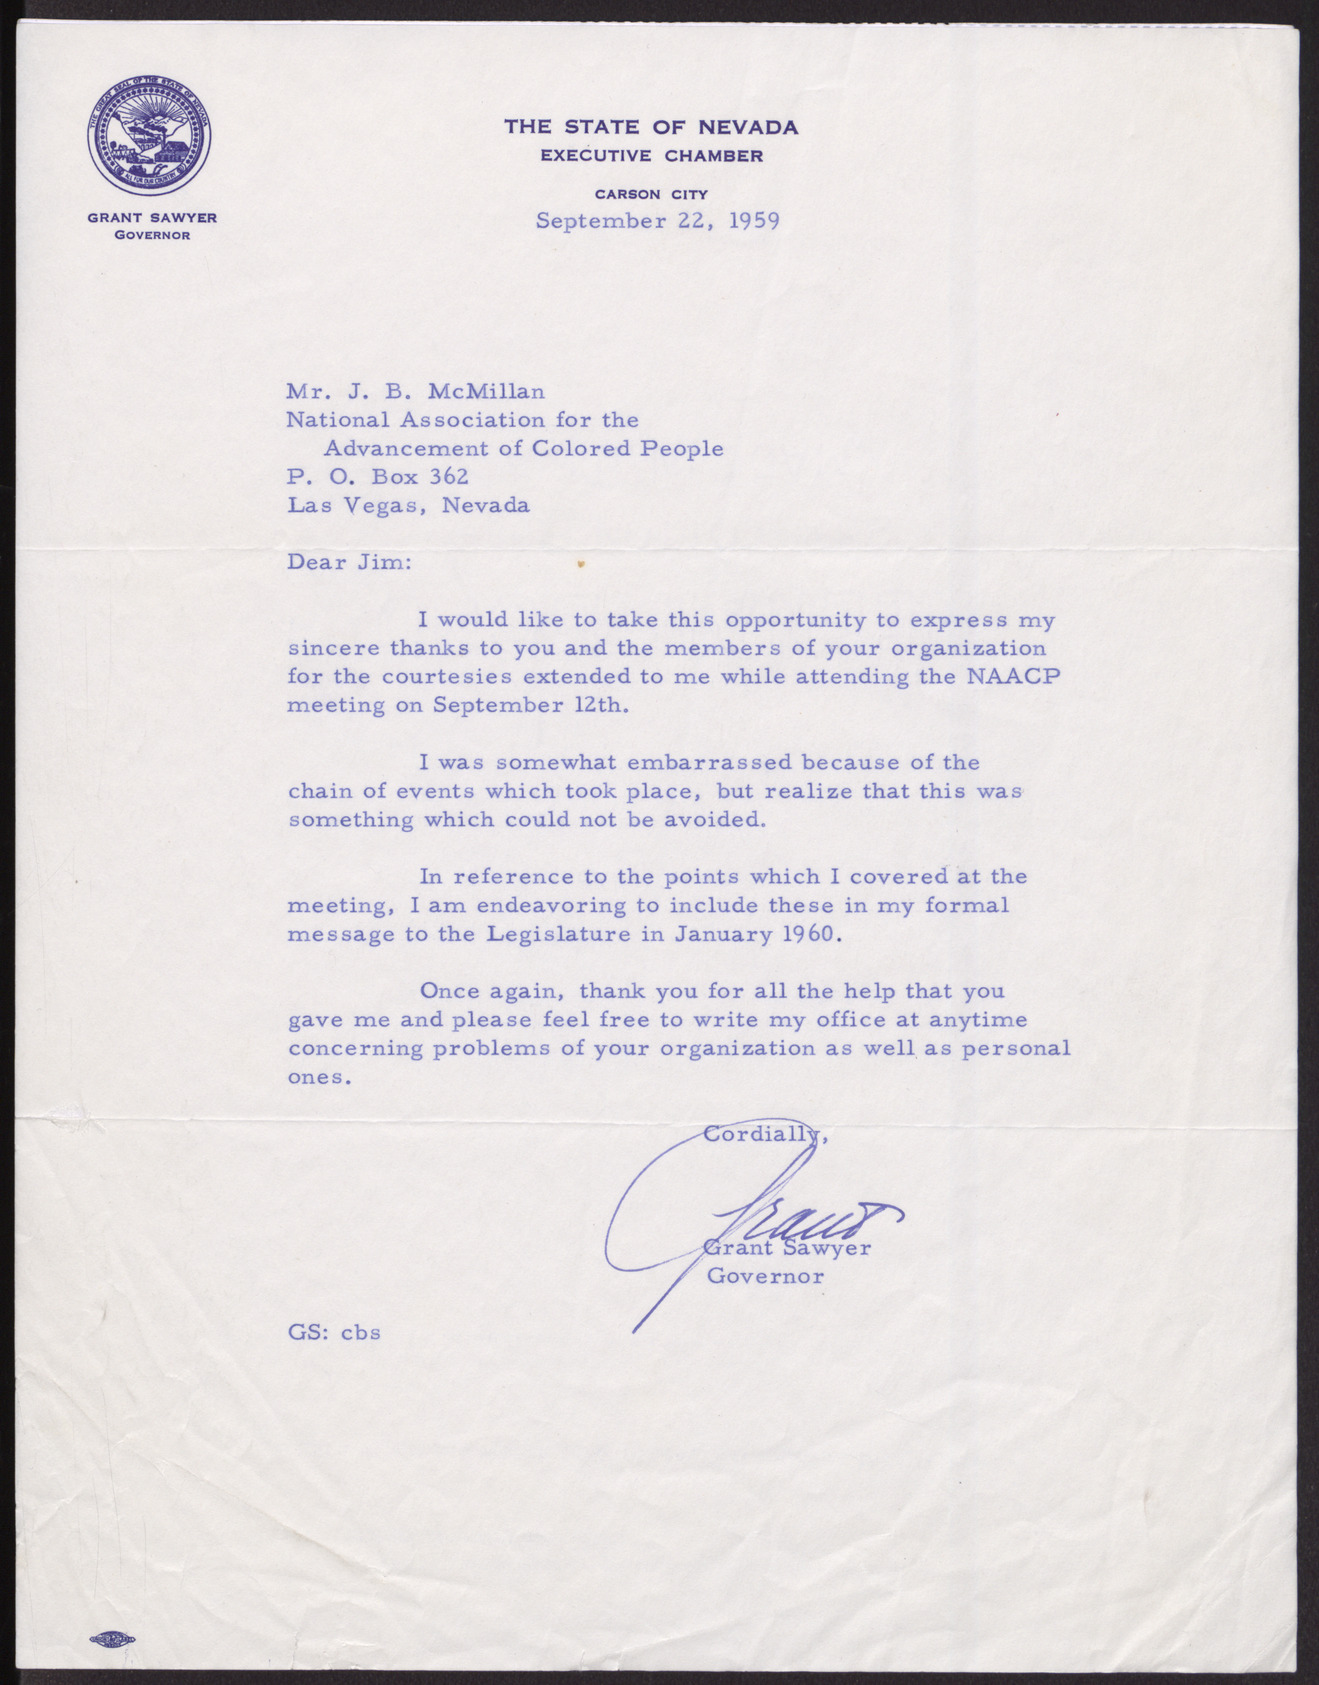 Letter to J. B. McMillan from Grant Sawyer, September 22, 1959